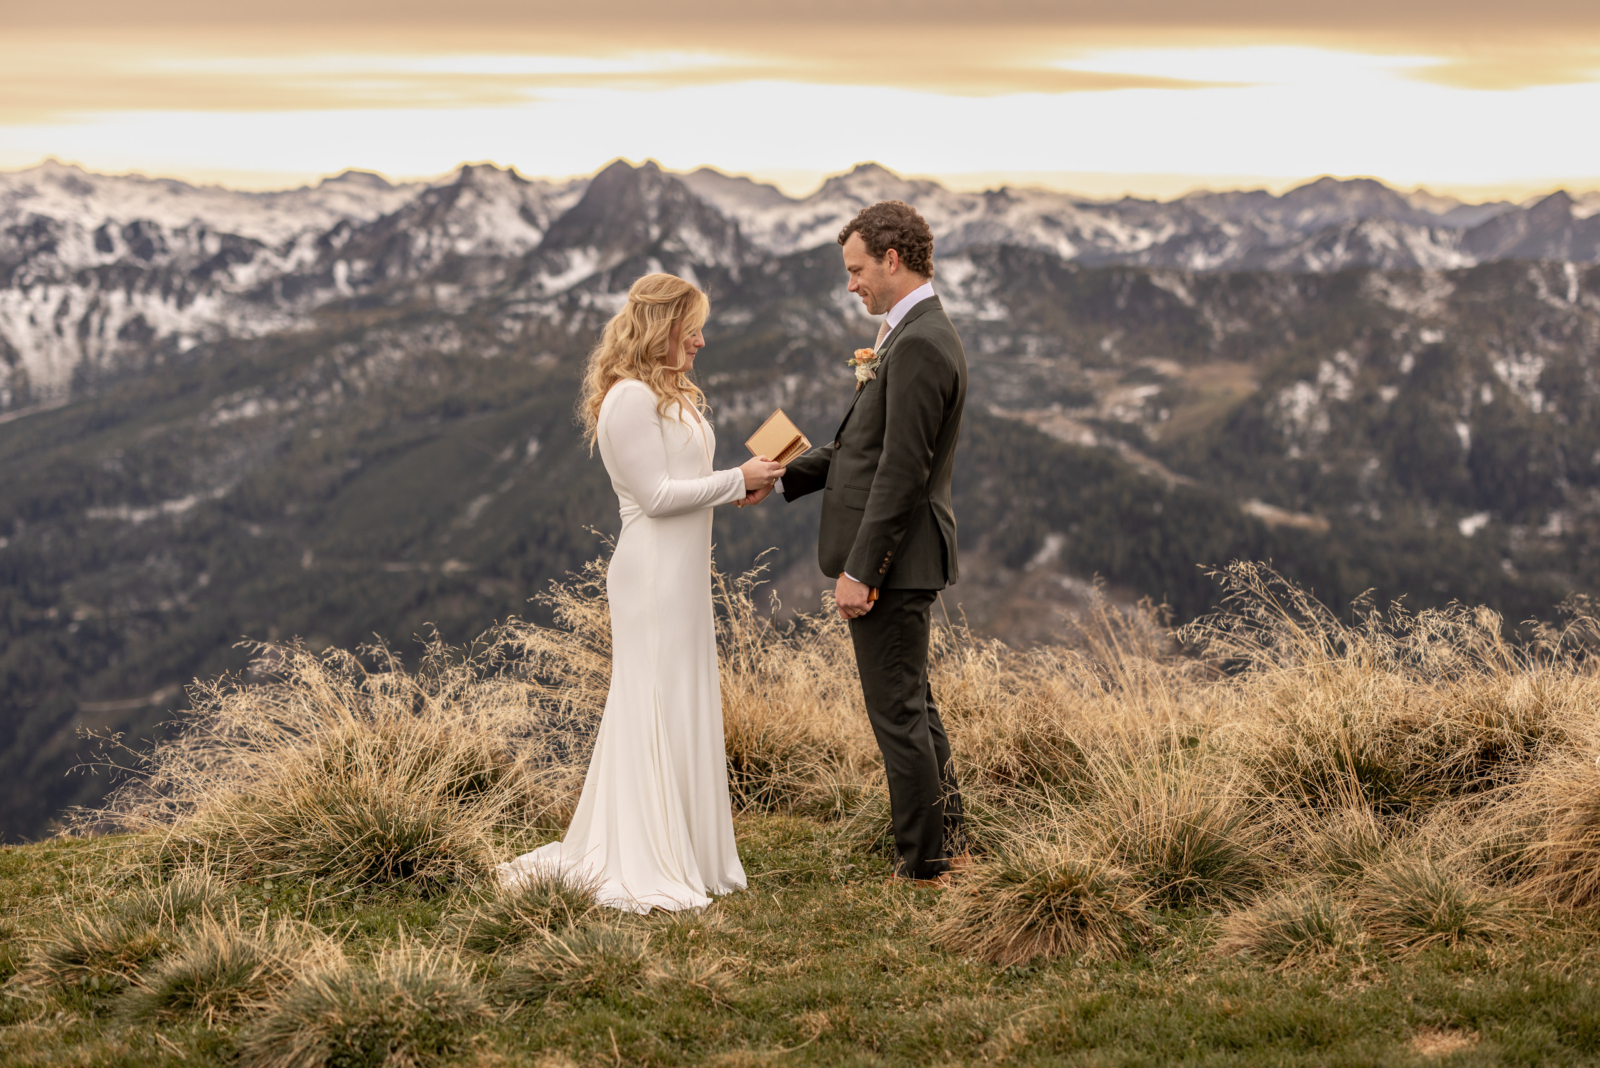 elopement vows on a mountain in austria